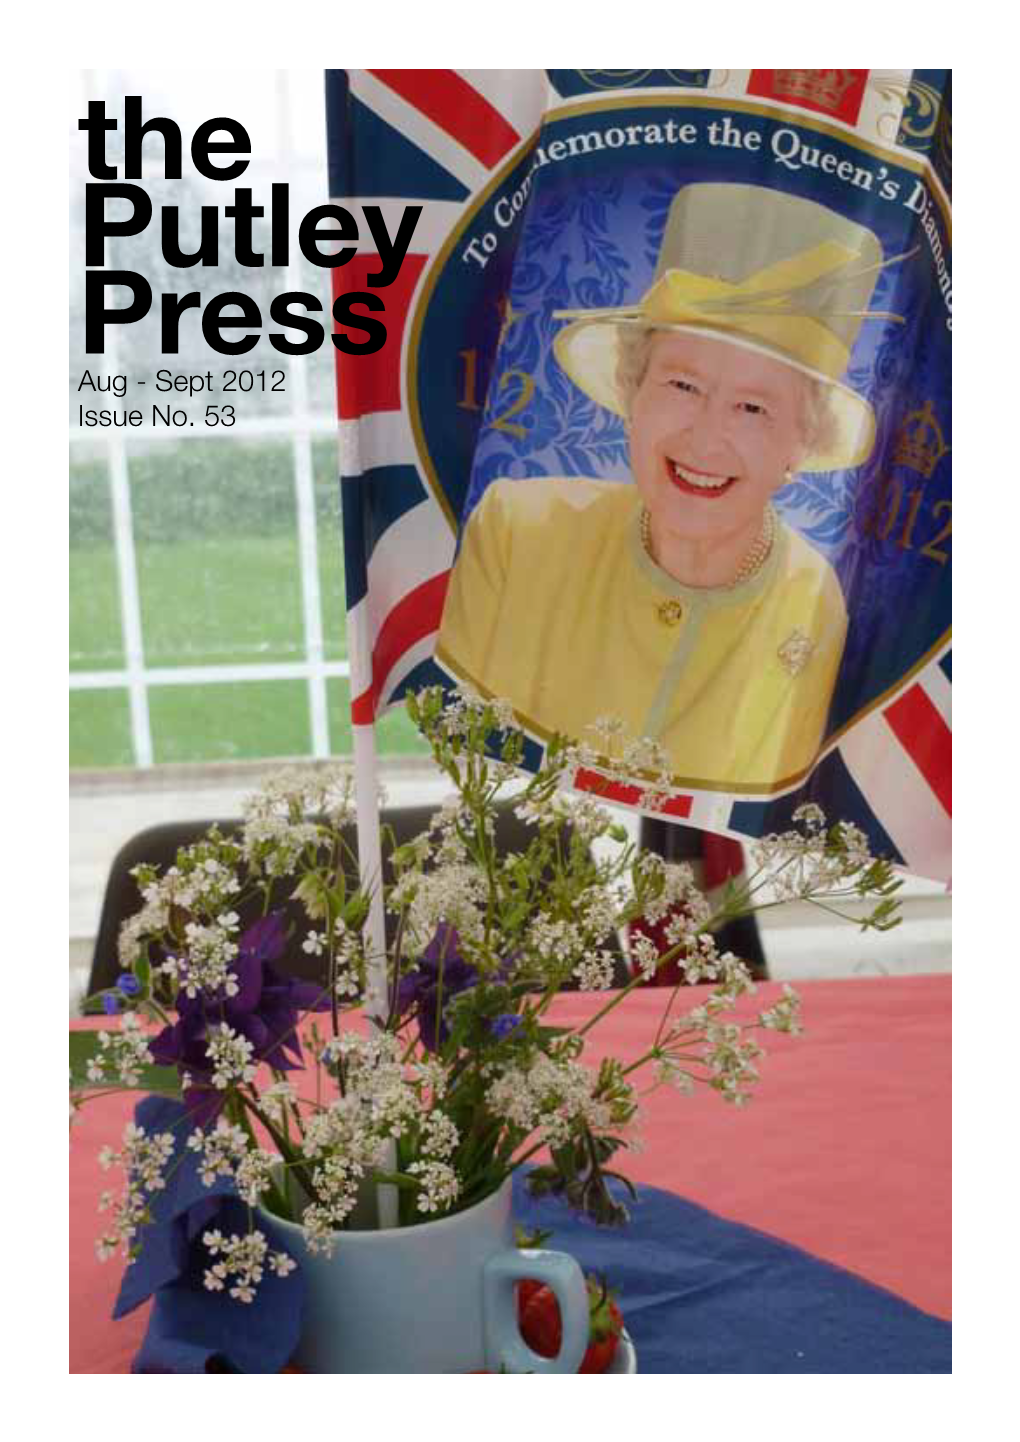 The Putley Press Aug - Sept 2012 Issue No